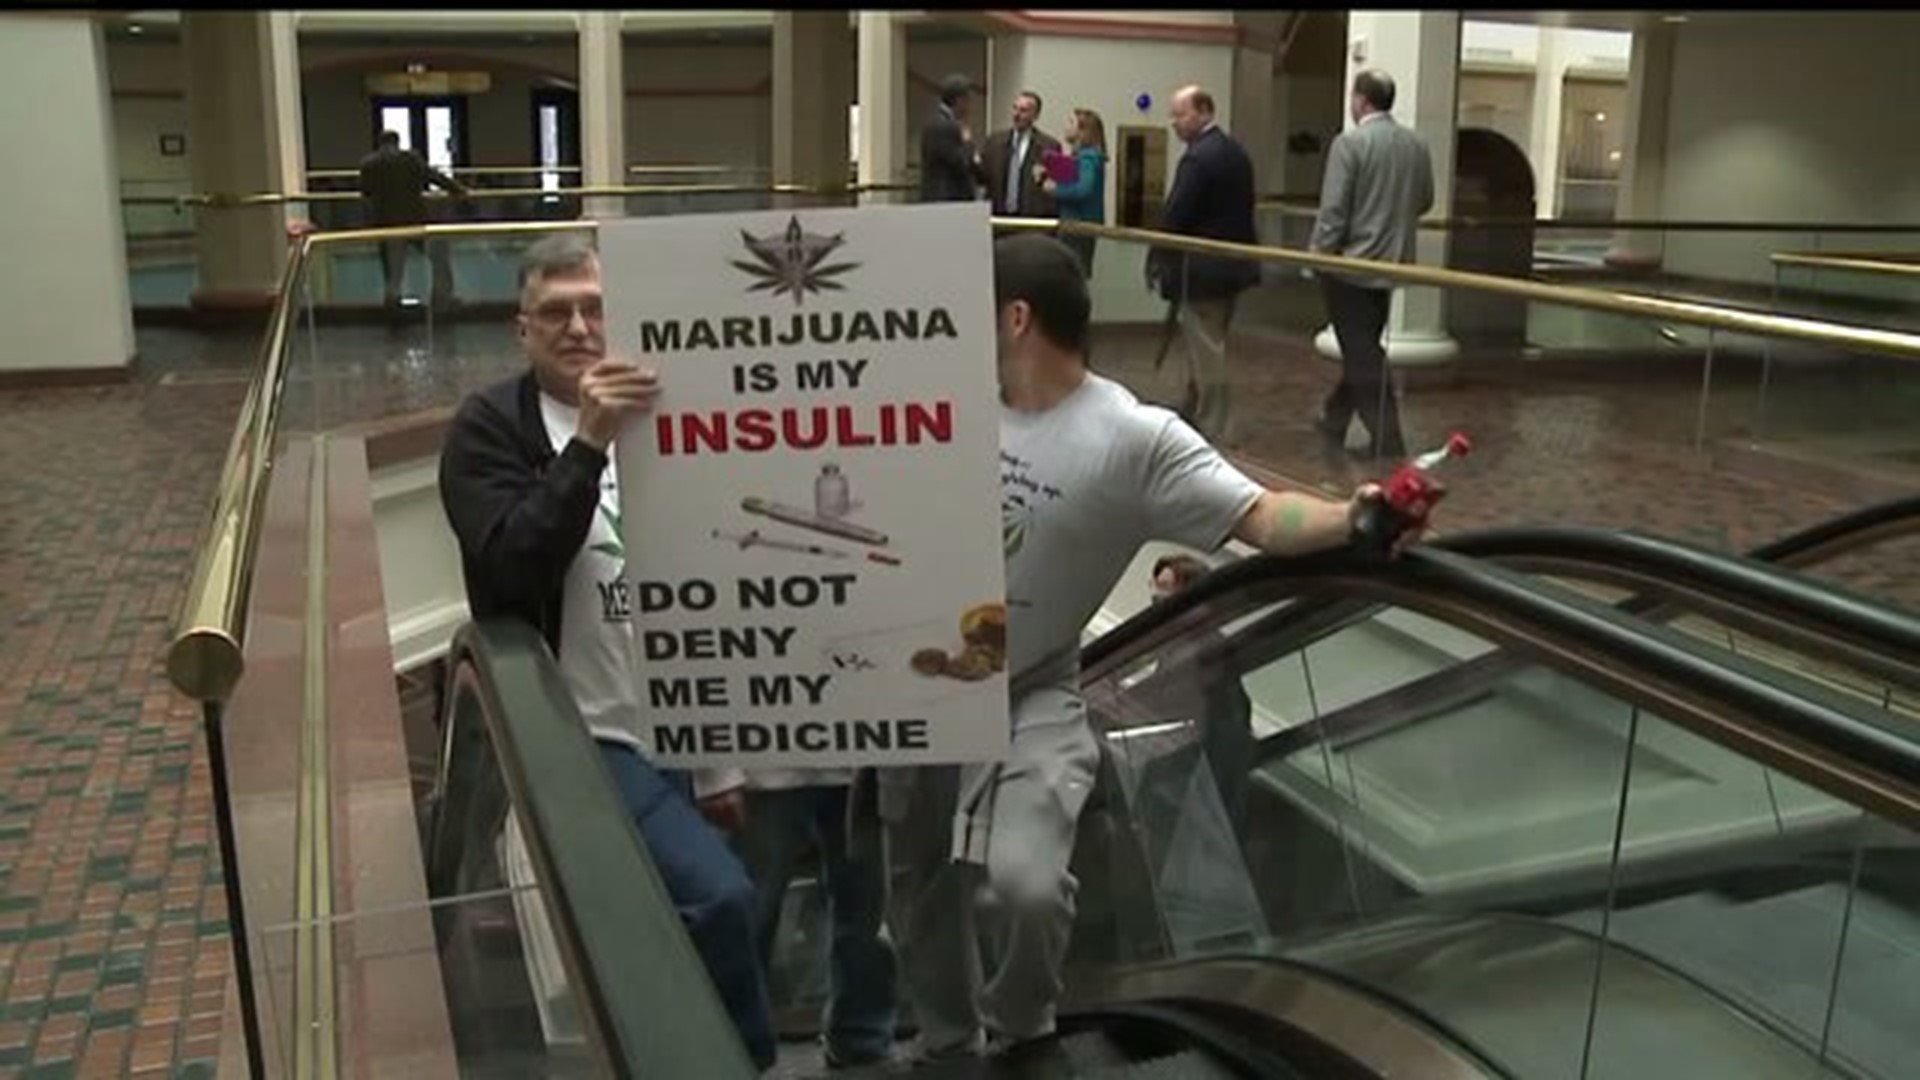 Vote on medical marijuana could come this week